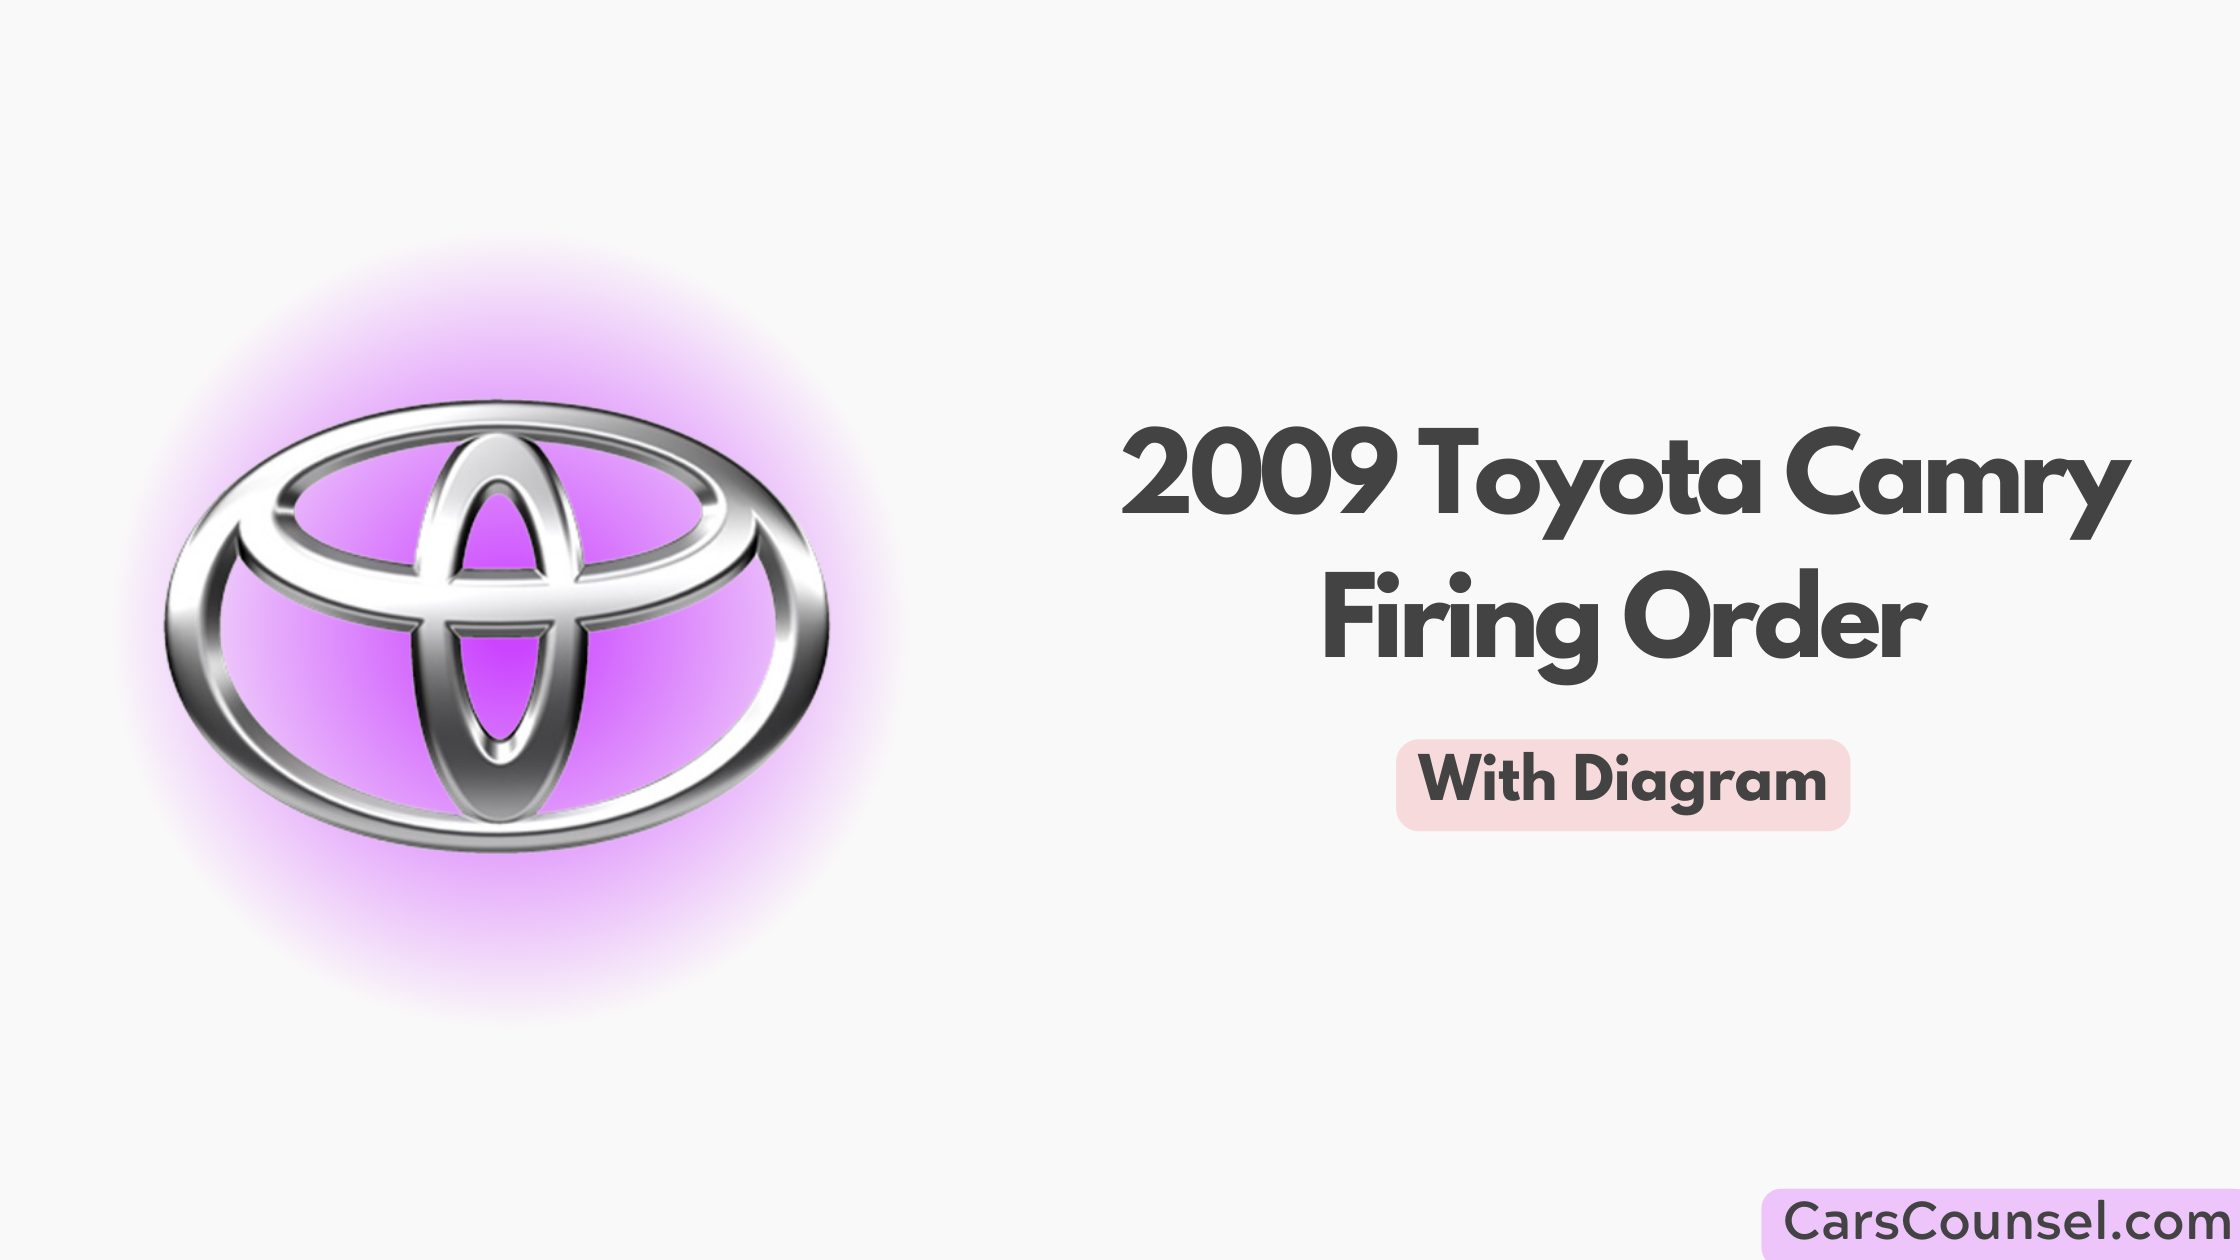 2009 Toyota Camry Firing Order With Diagram